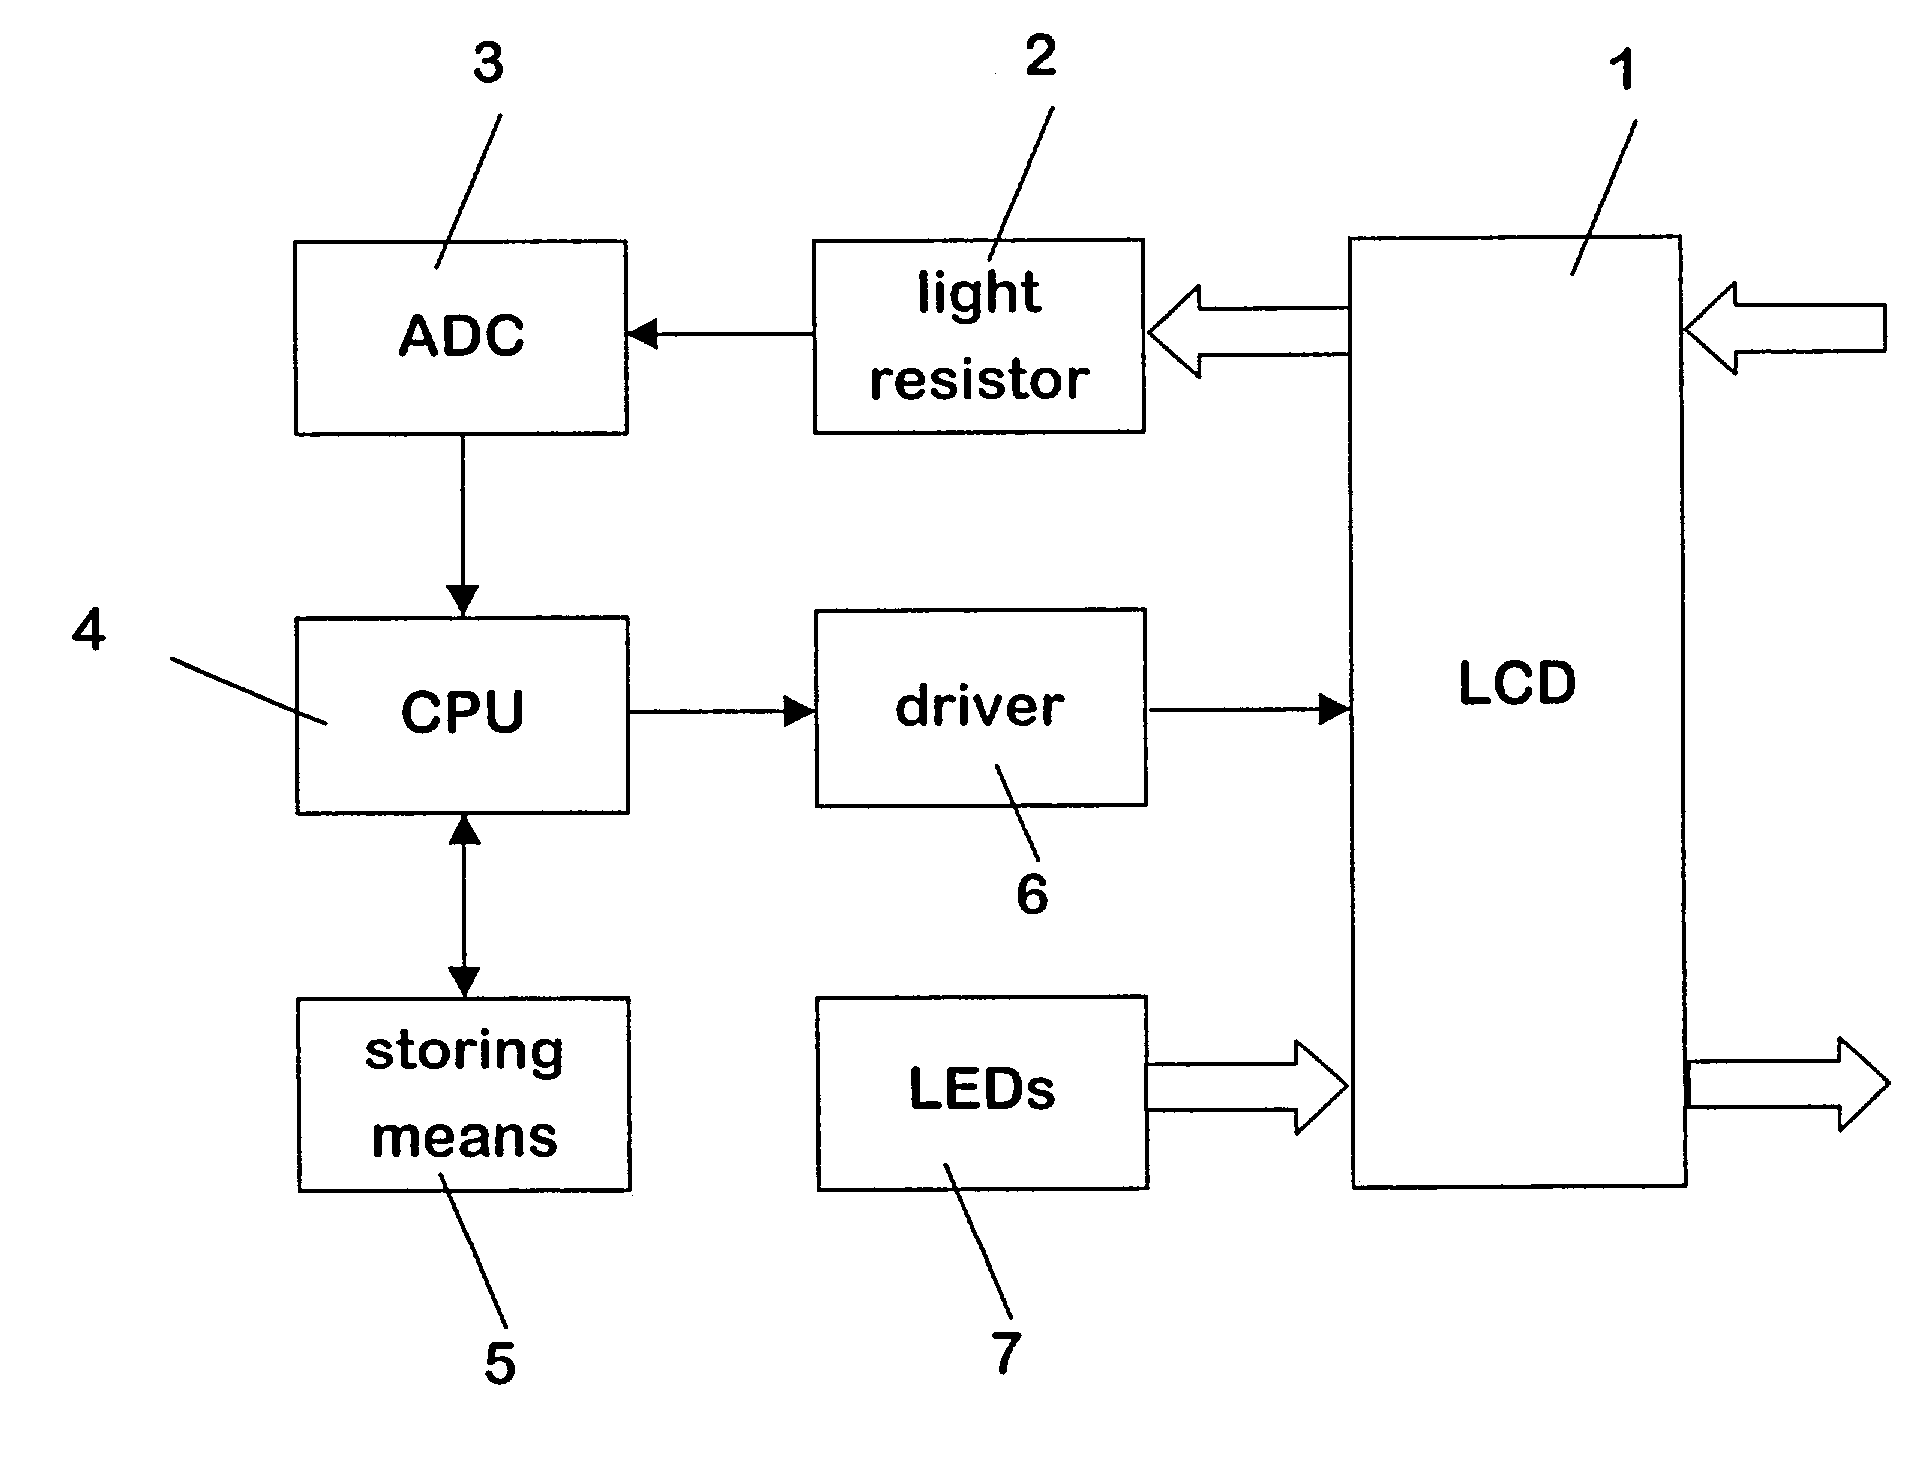 Determining the lighting conditions surrounding a device